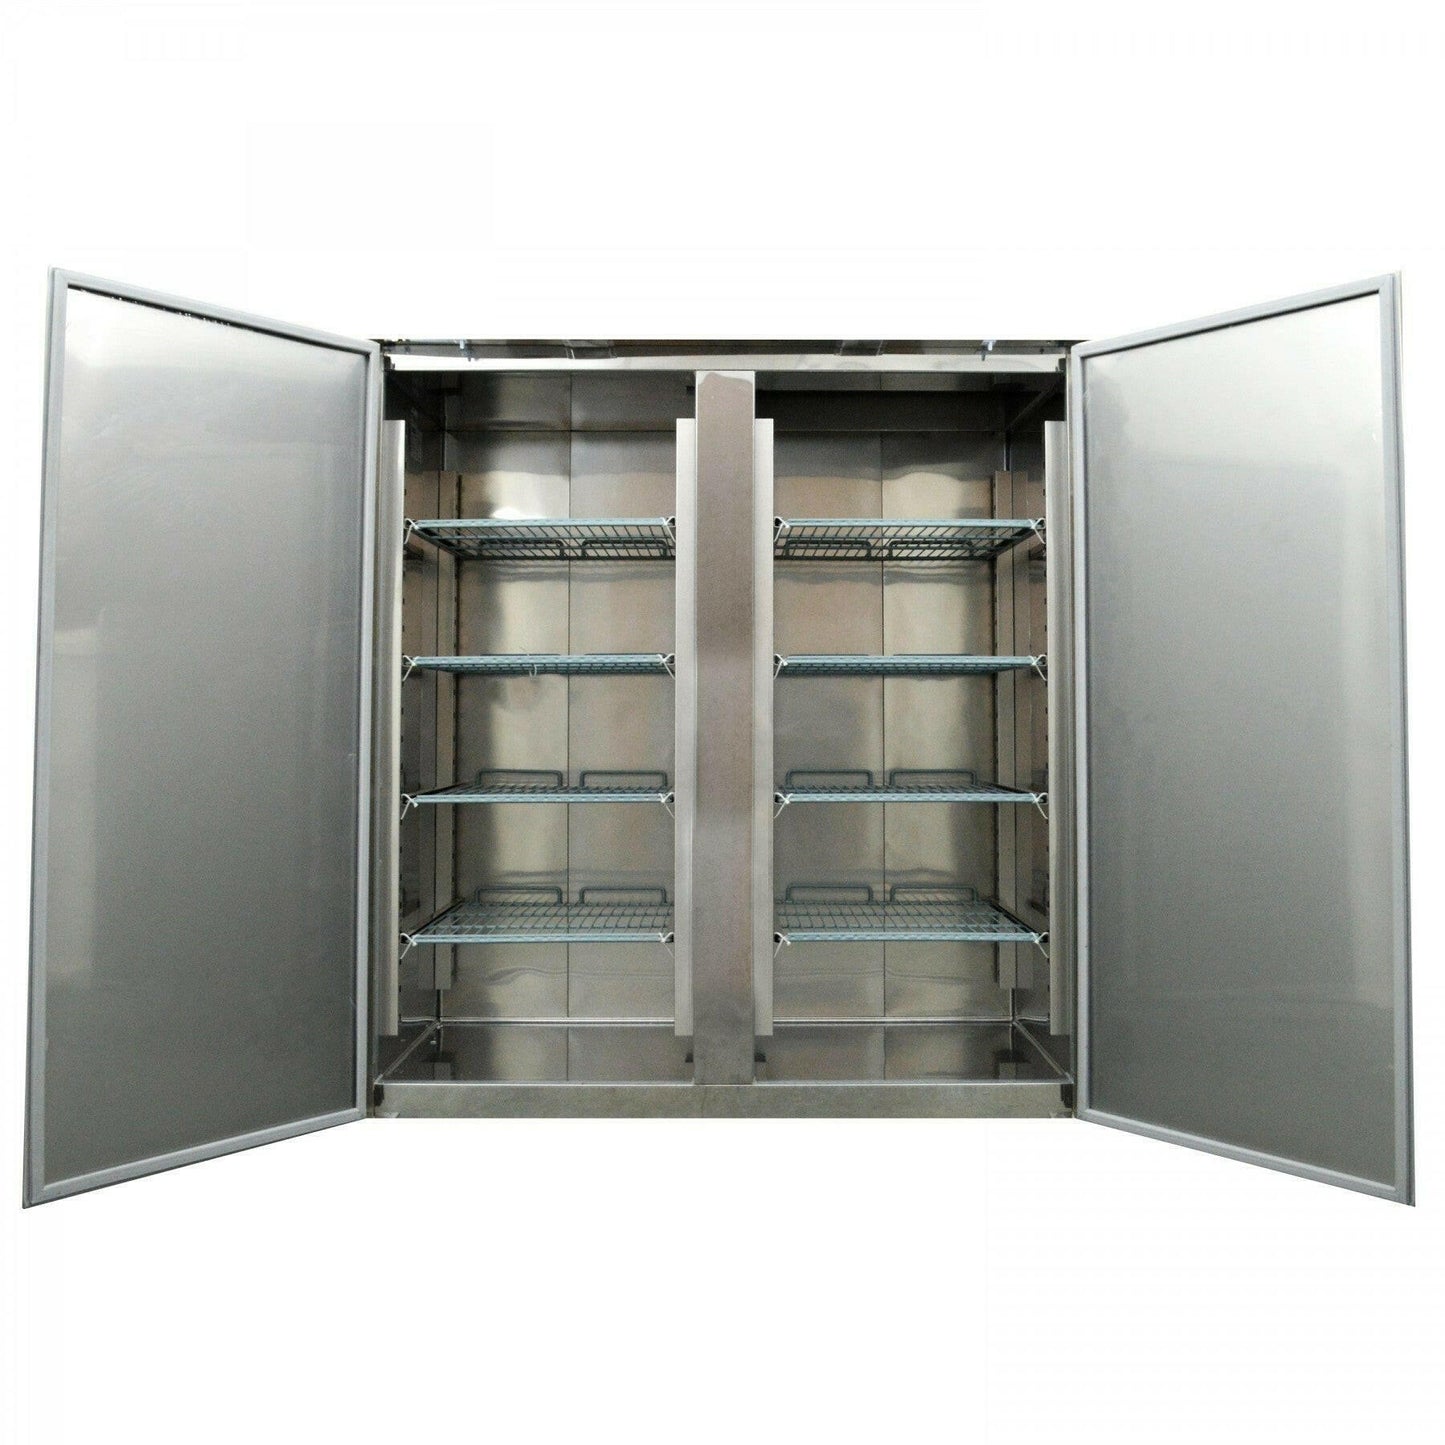 Blizzard BR2SS Upright Double Door Refrigerator 1300 Litres